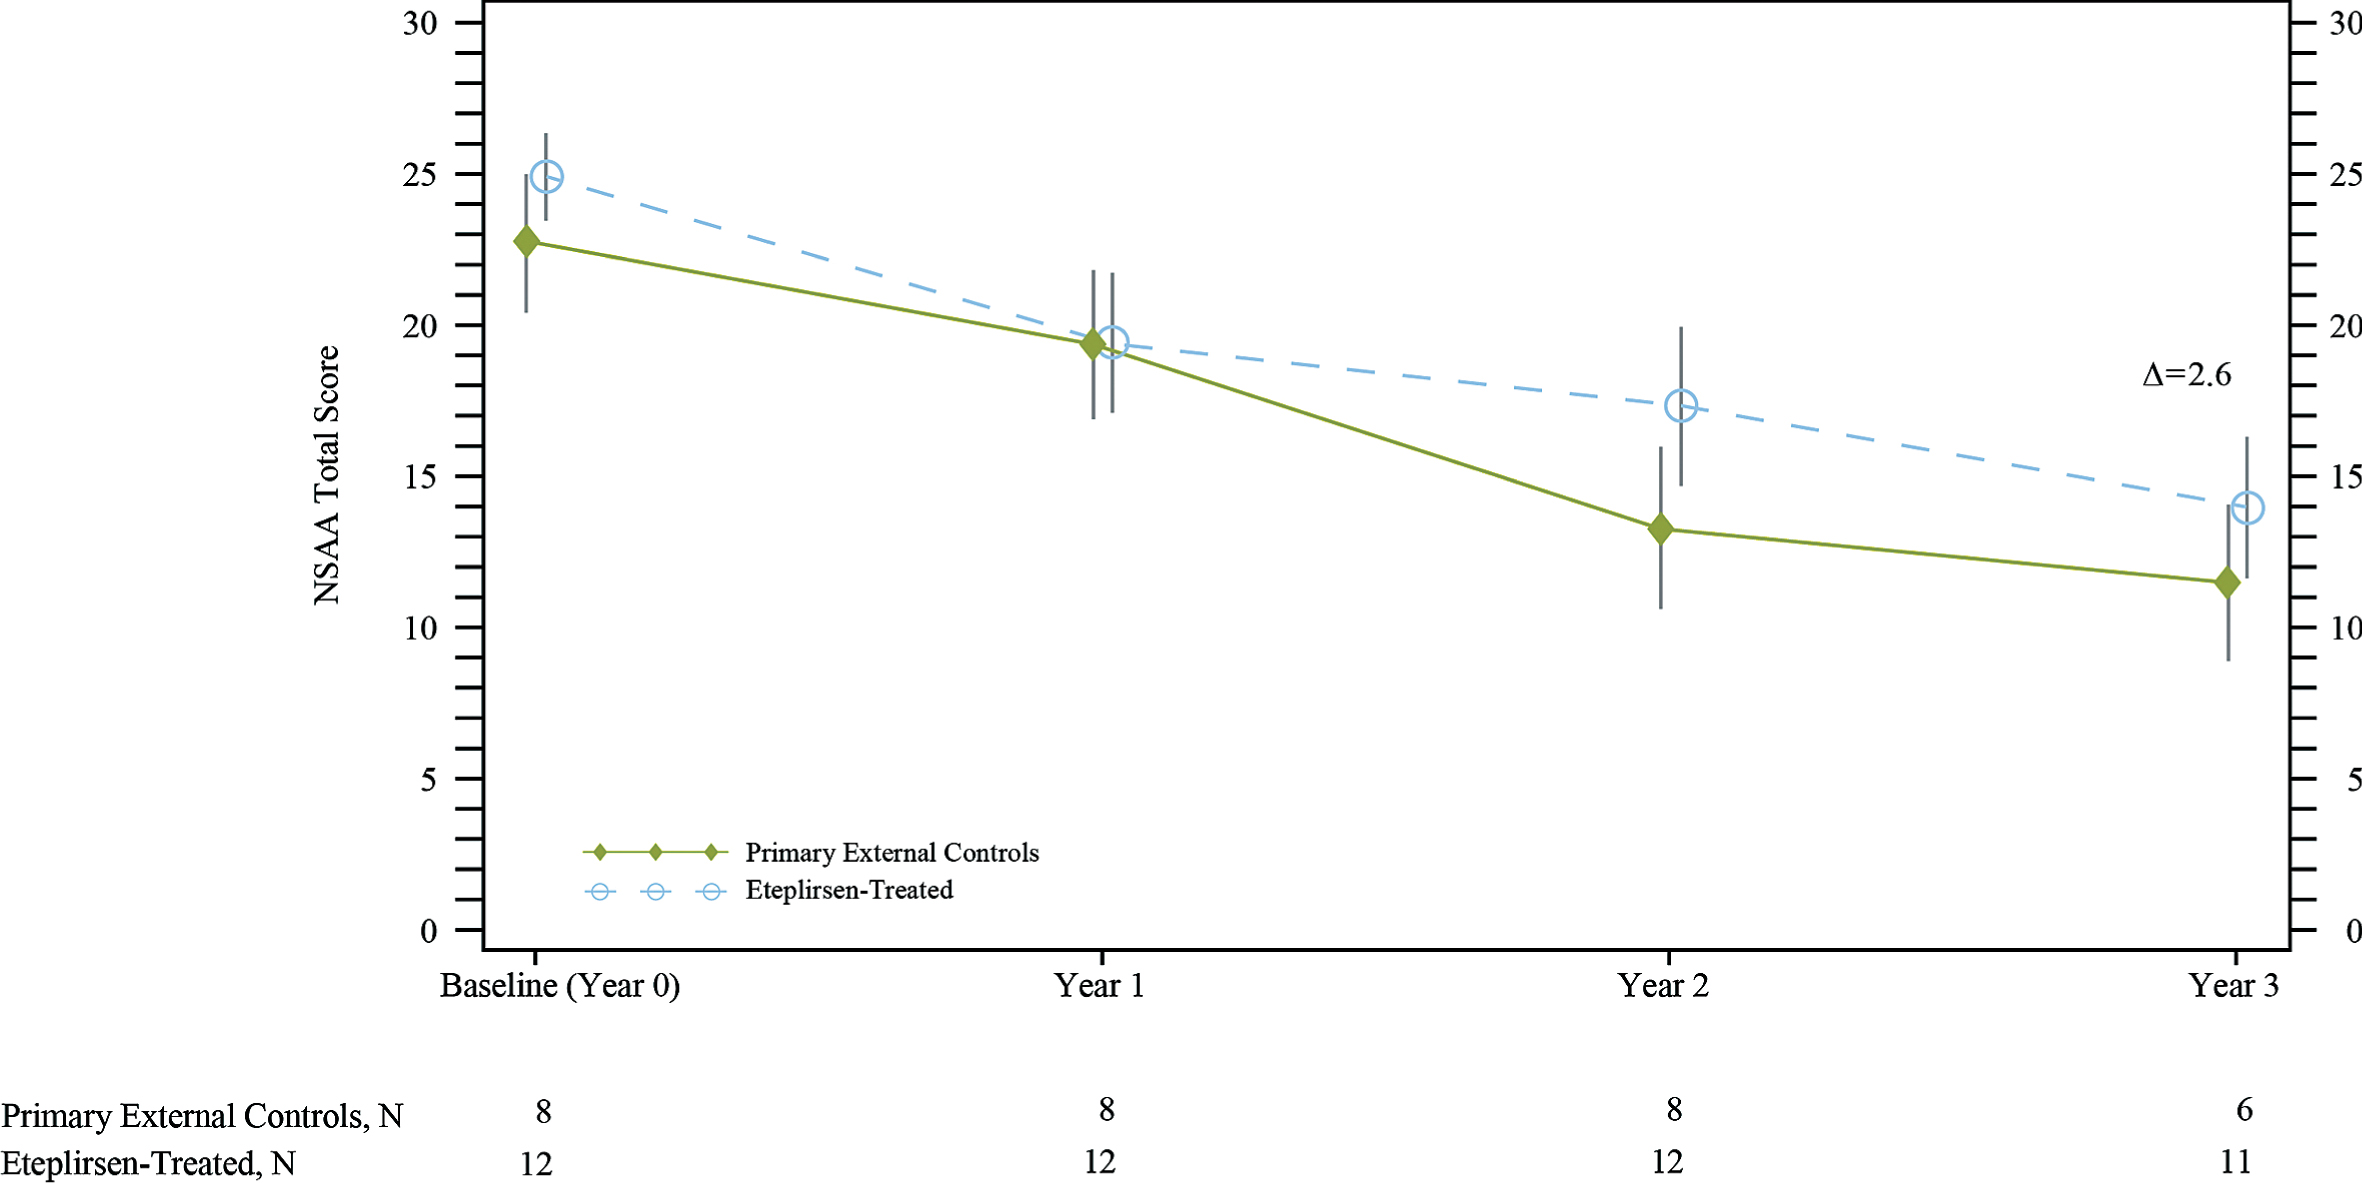 North Star Ambulatory Assessment (NSAA) total score showed that eteplirsen-treated patients experienced less decline compared with primary external controls over 3 years. Δ represents the unadjusted difference in mean change from baseline in eteplirsen-treated patients versus external controls. NSAA data for primary external controls were available from the Italian Telethon registry patients only (8 of the 12 natural history patients used for ambulatory comparisons). In the eteplirsen-treated group, 1 patient did not have NSAA measured at Year 3.